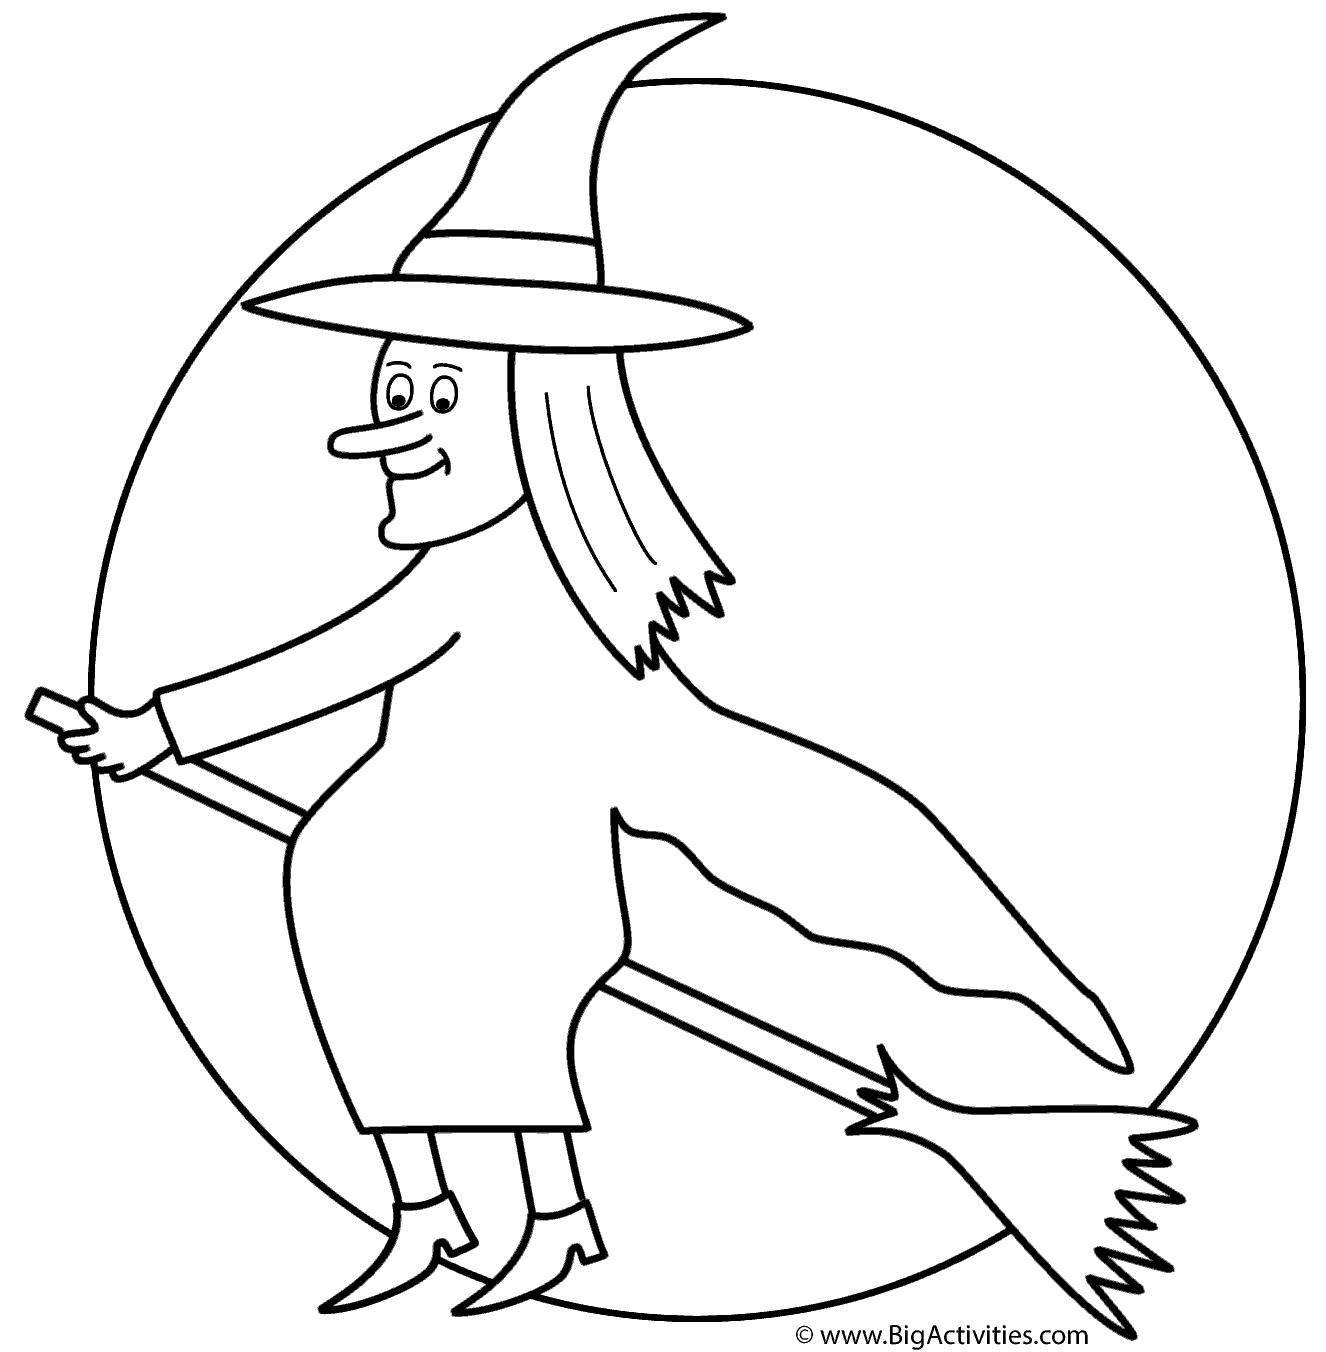 Witch on broom with the moon - Coloring Page (Halloween)